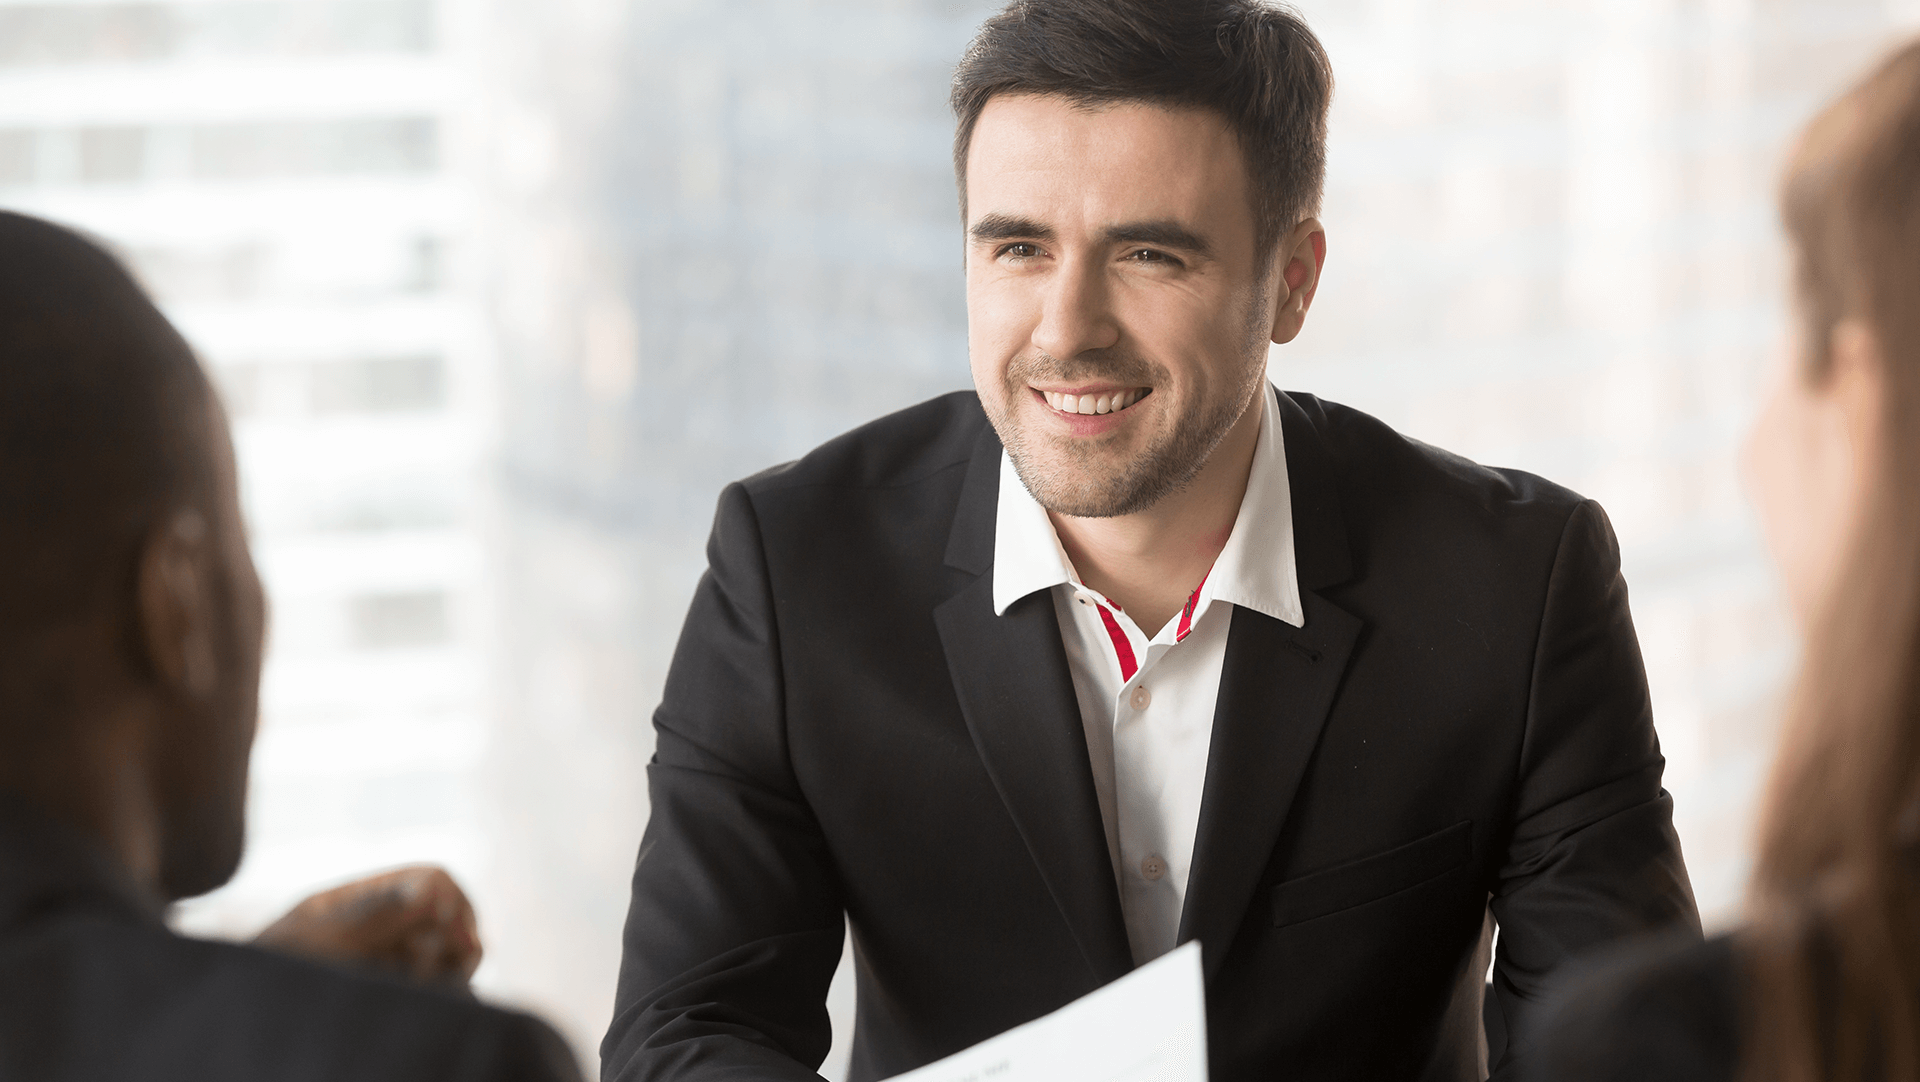 Smiling businessman in a meeting with colleagues, exuding confidence and engagement.